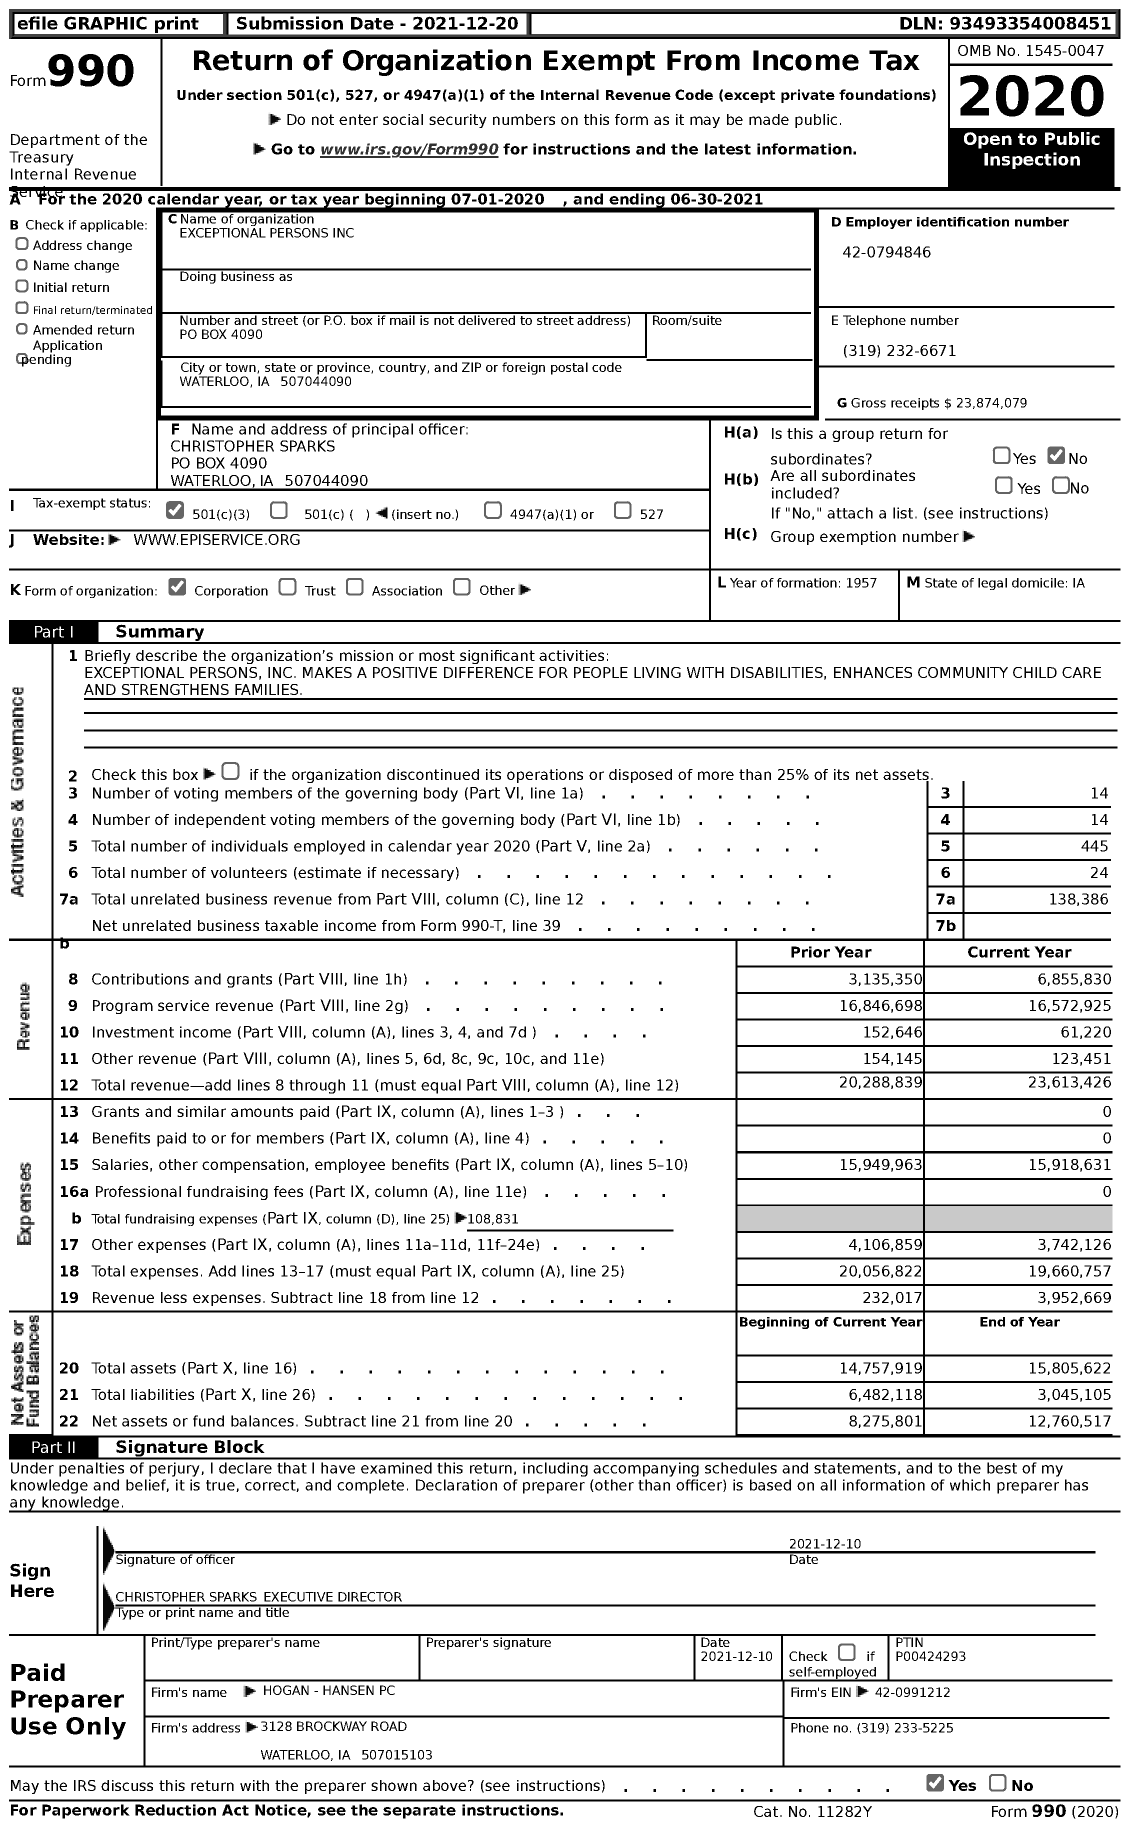 Image of first page of 2020 Form 990 for Exceptional Persons